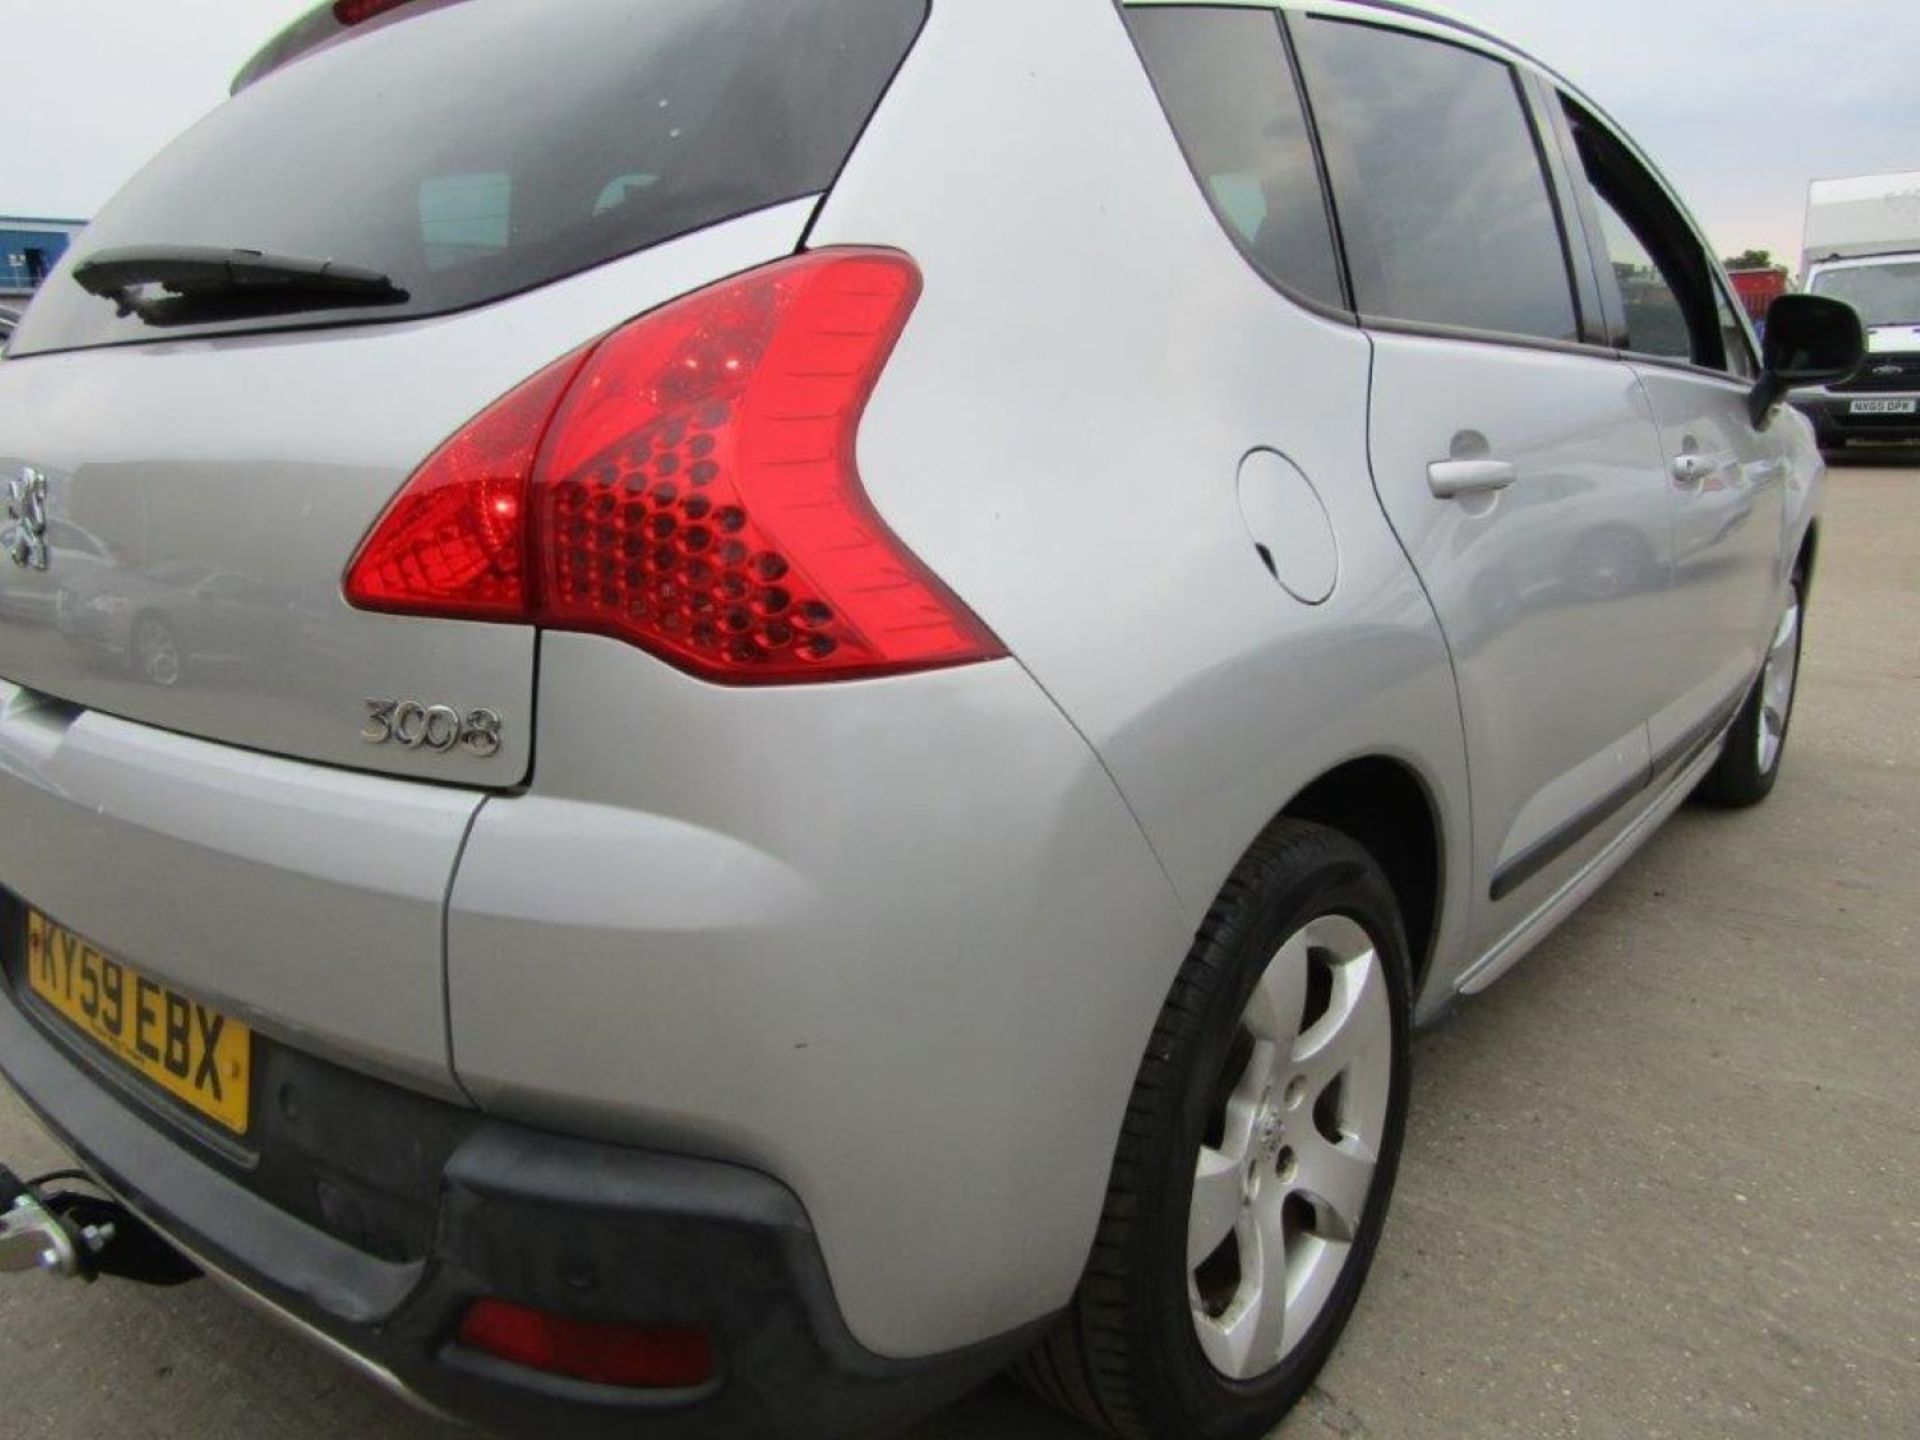 59 09 Peugeot 3008 Exclusive HDI - Image 19 of 24